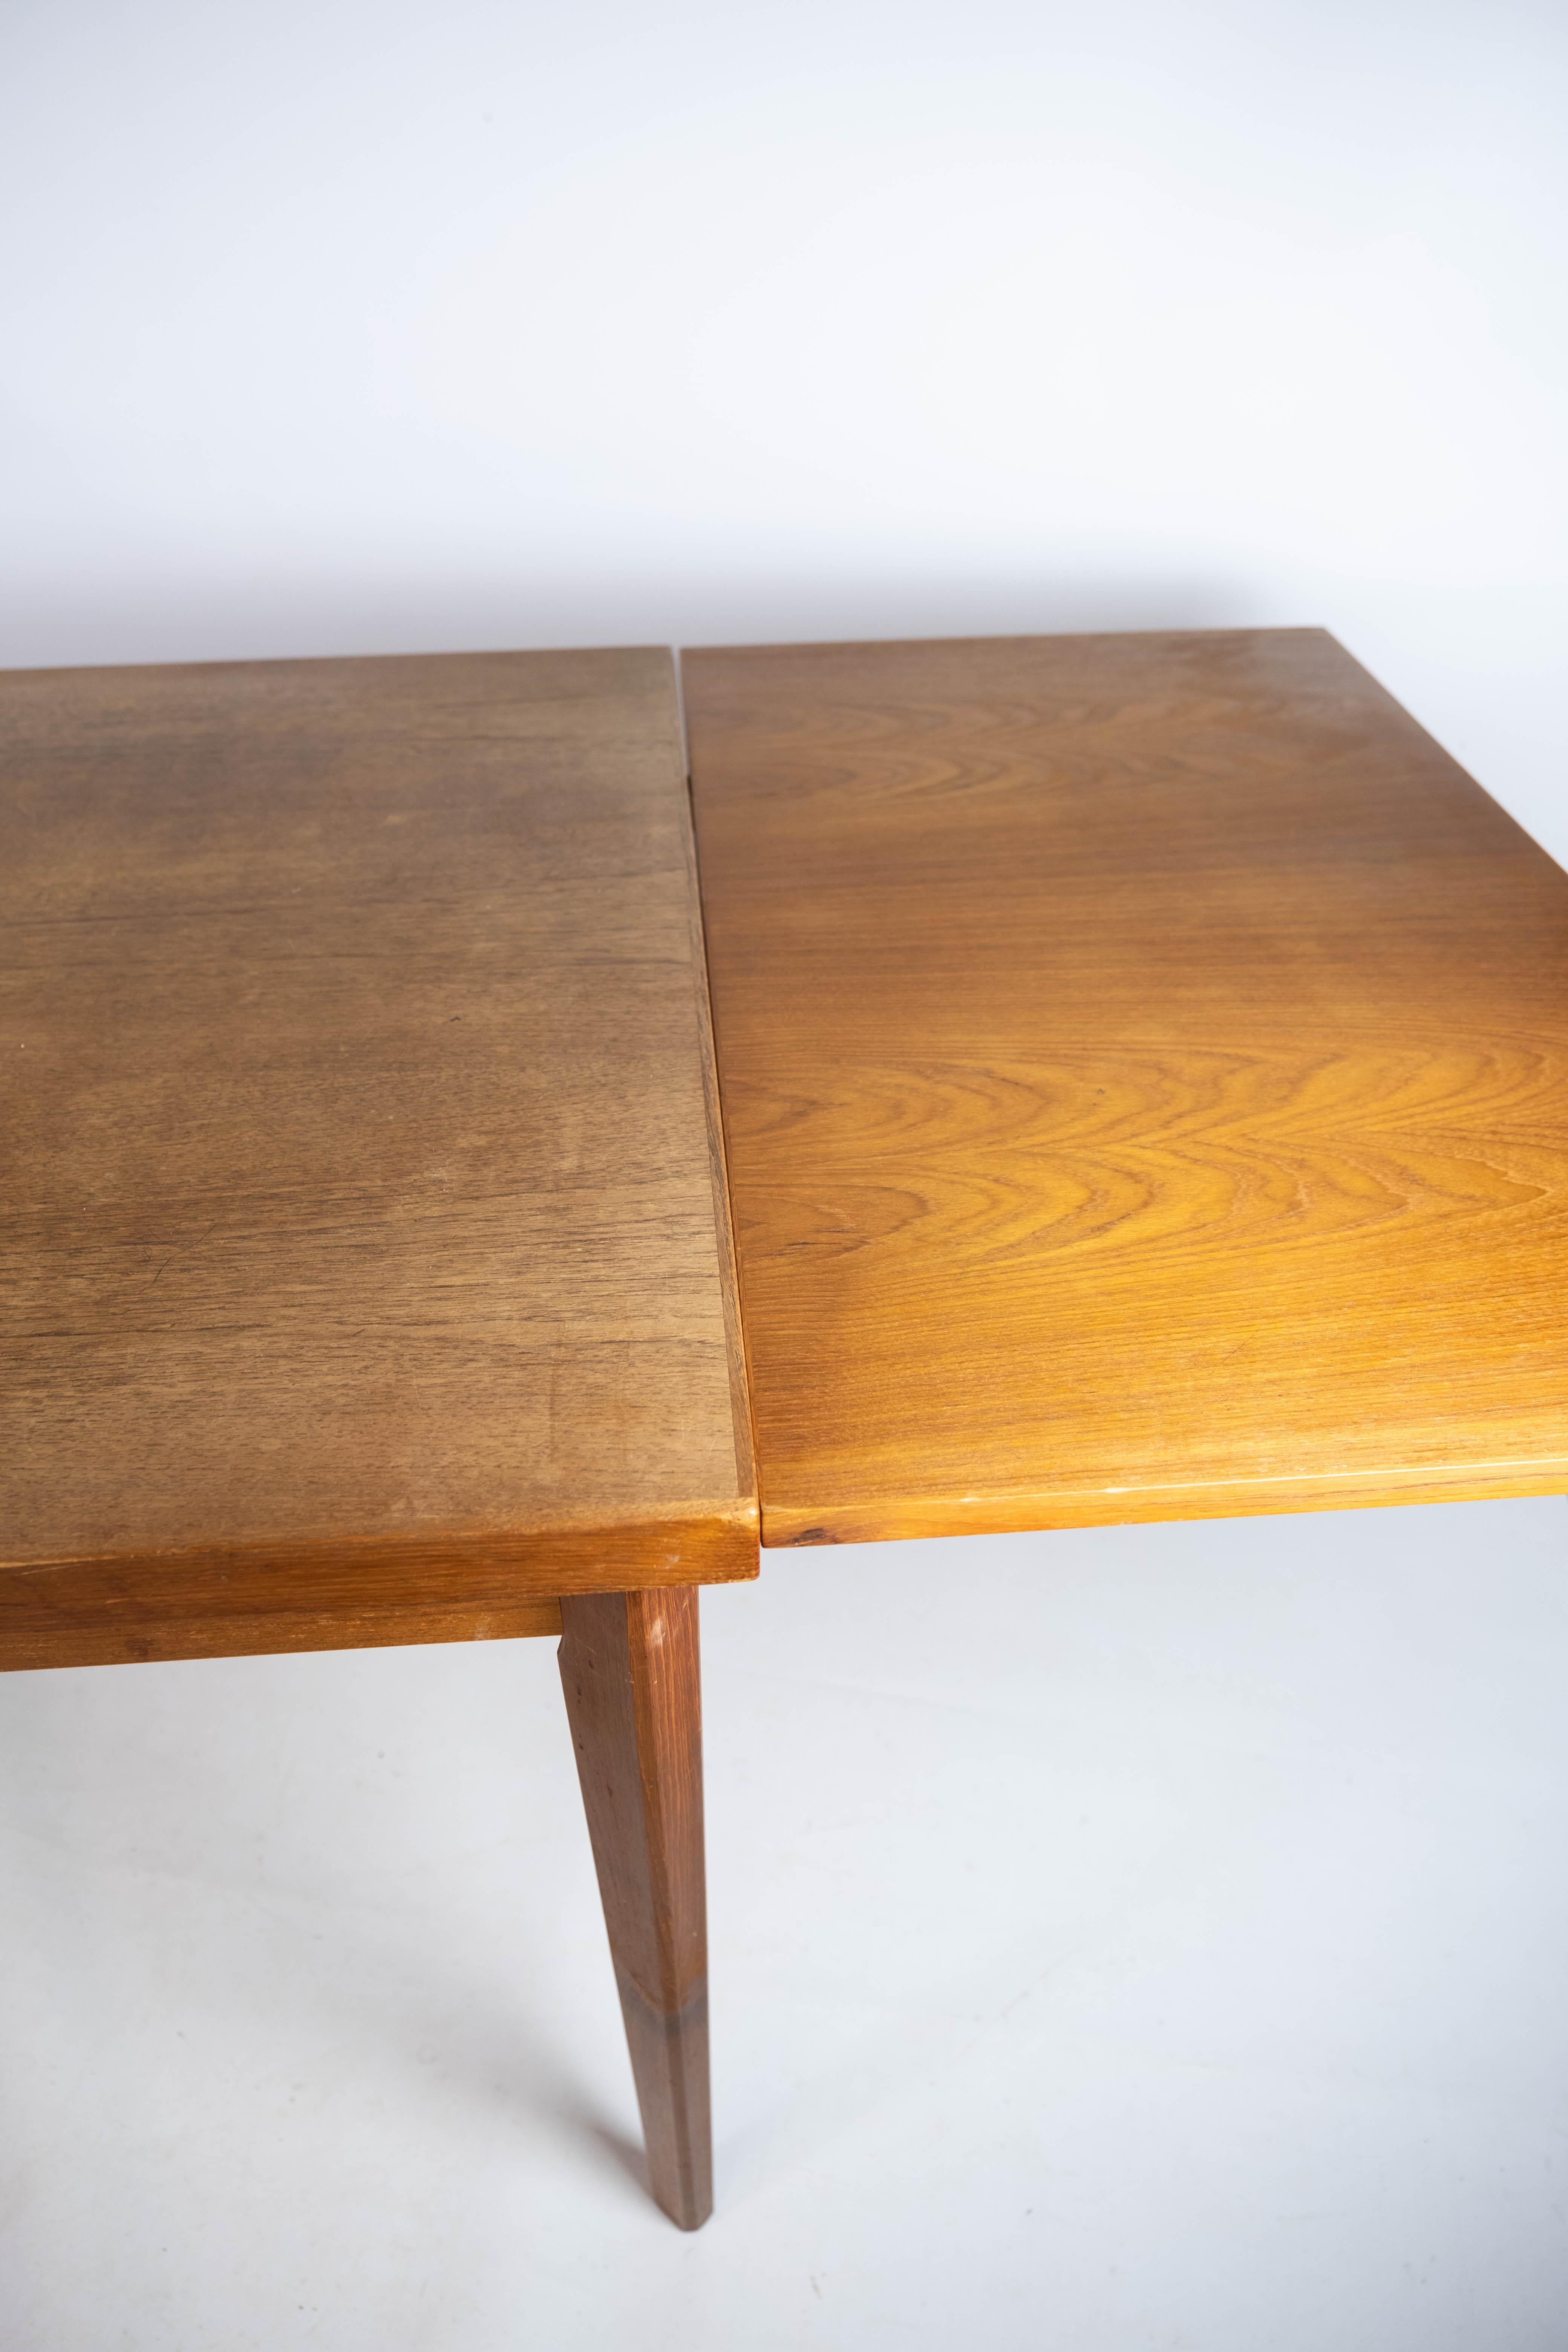 Dining Table with Extensions in Teak of Danish Design from the 1960s For Sale 2